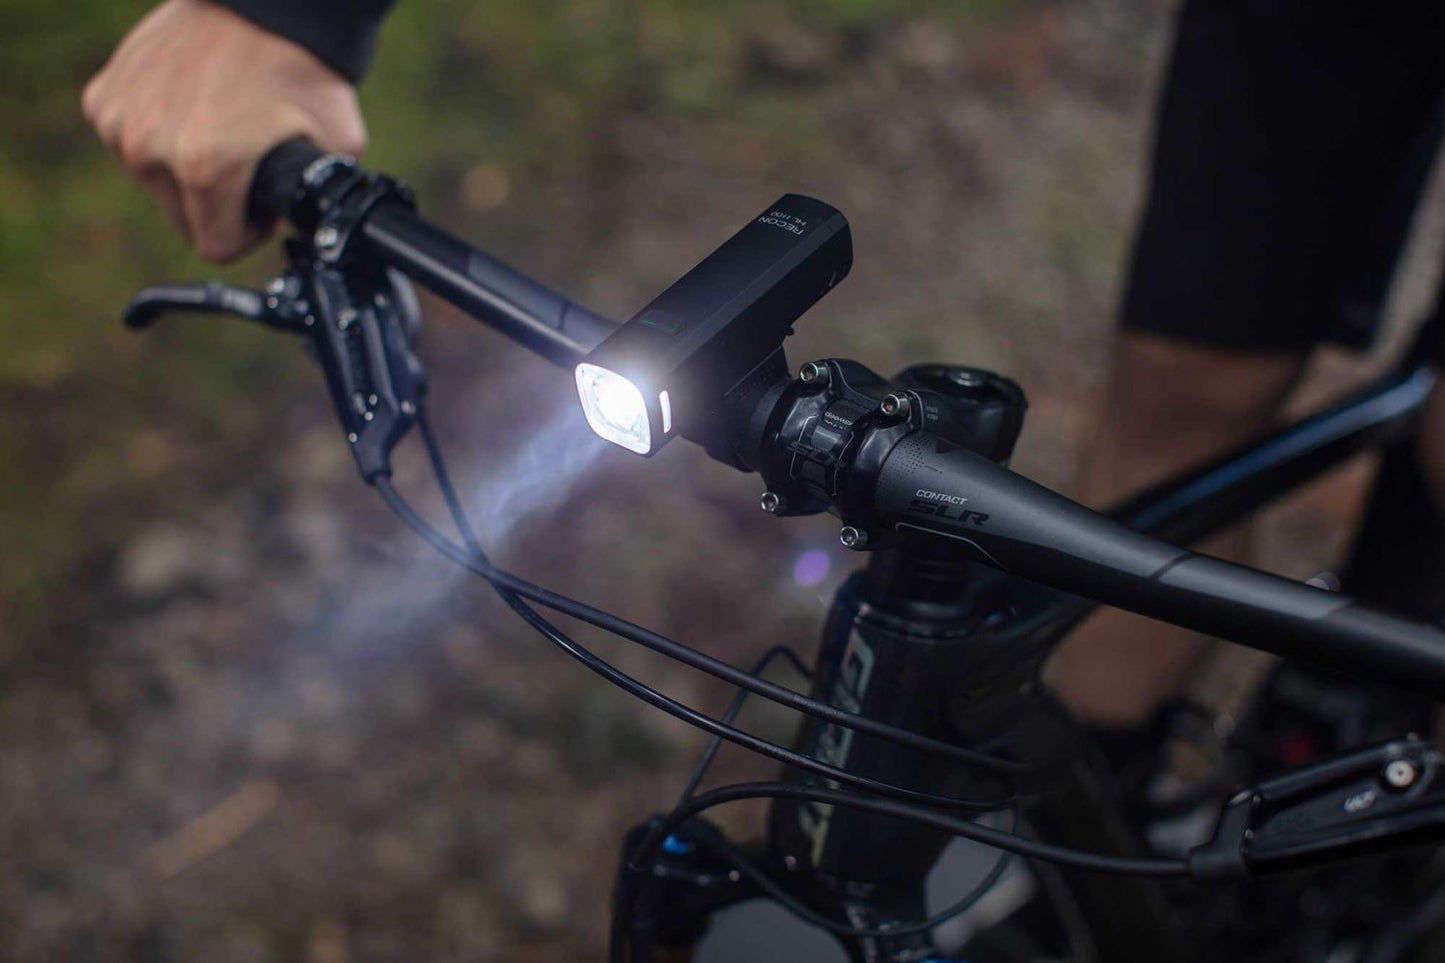 GIANT RECON HL 1100 FRONT LIGHT